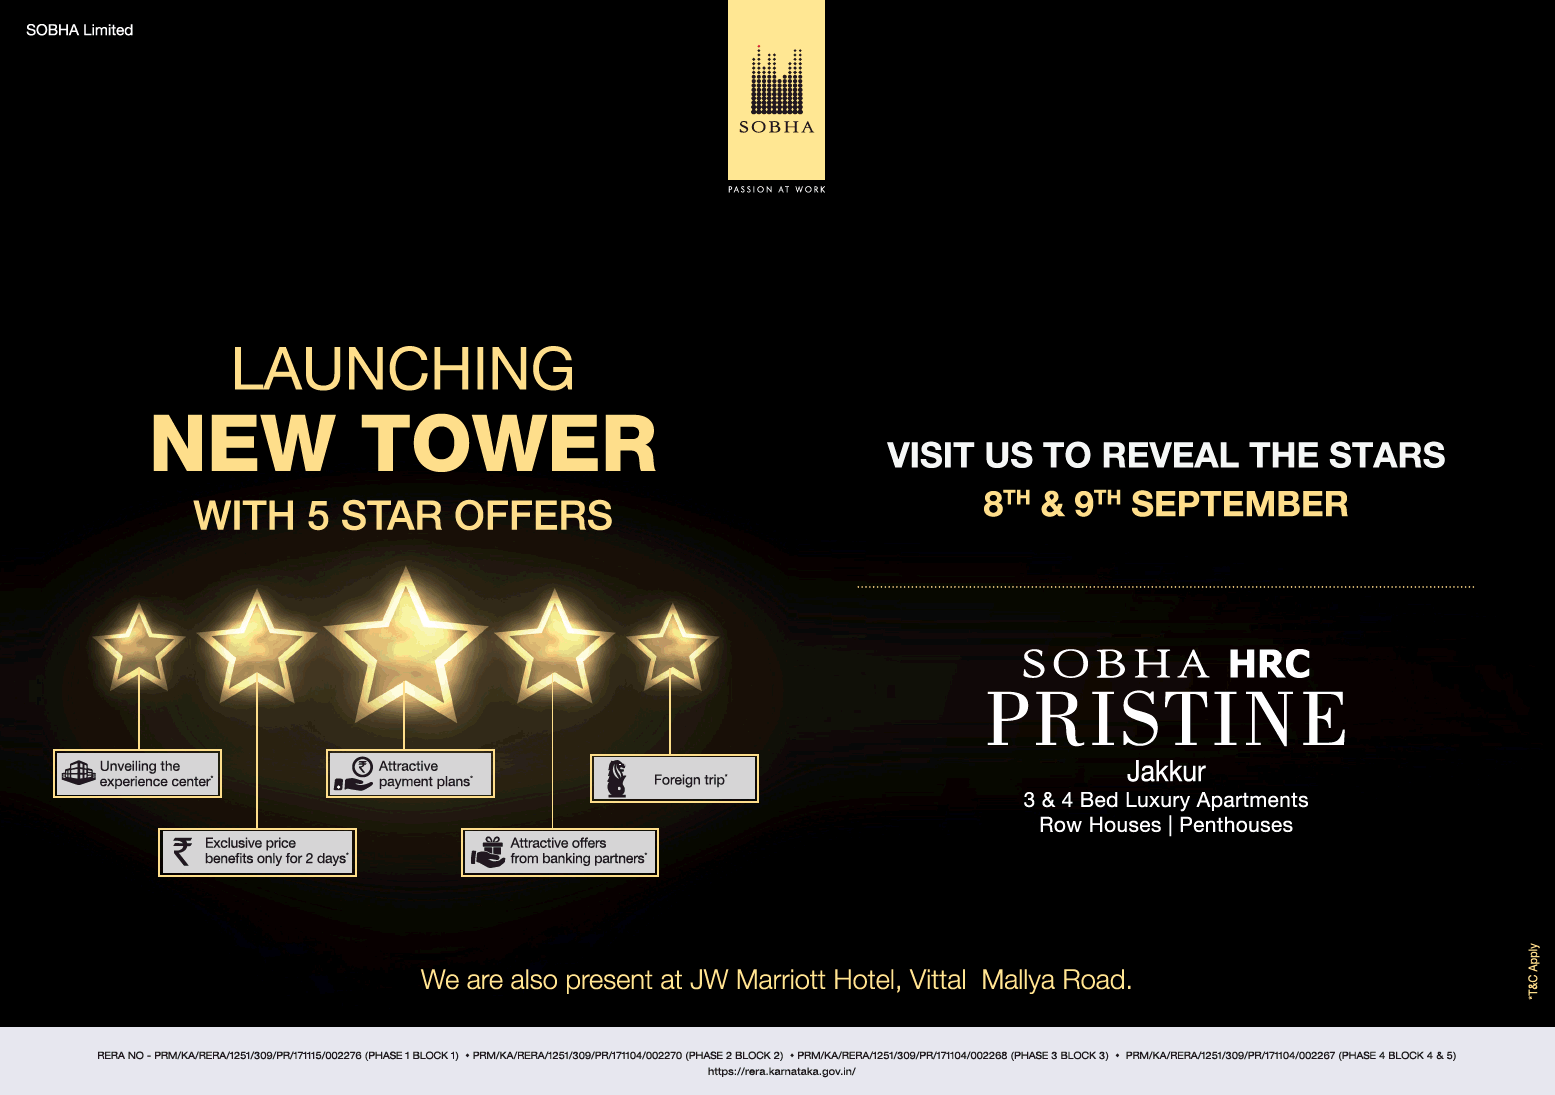 Launching new tower with 5 star offers at Sobha HRC Pristine in Jakkur, Bangalore Update